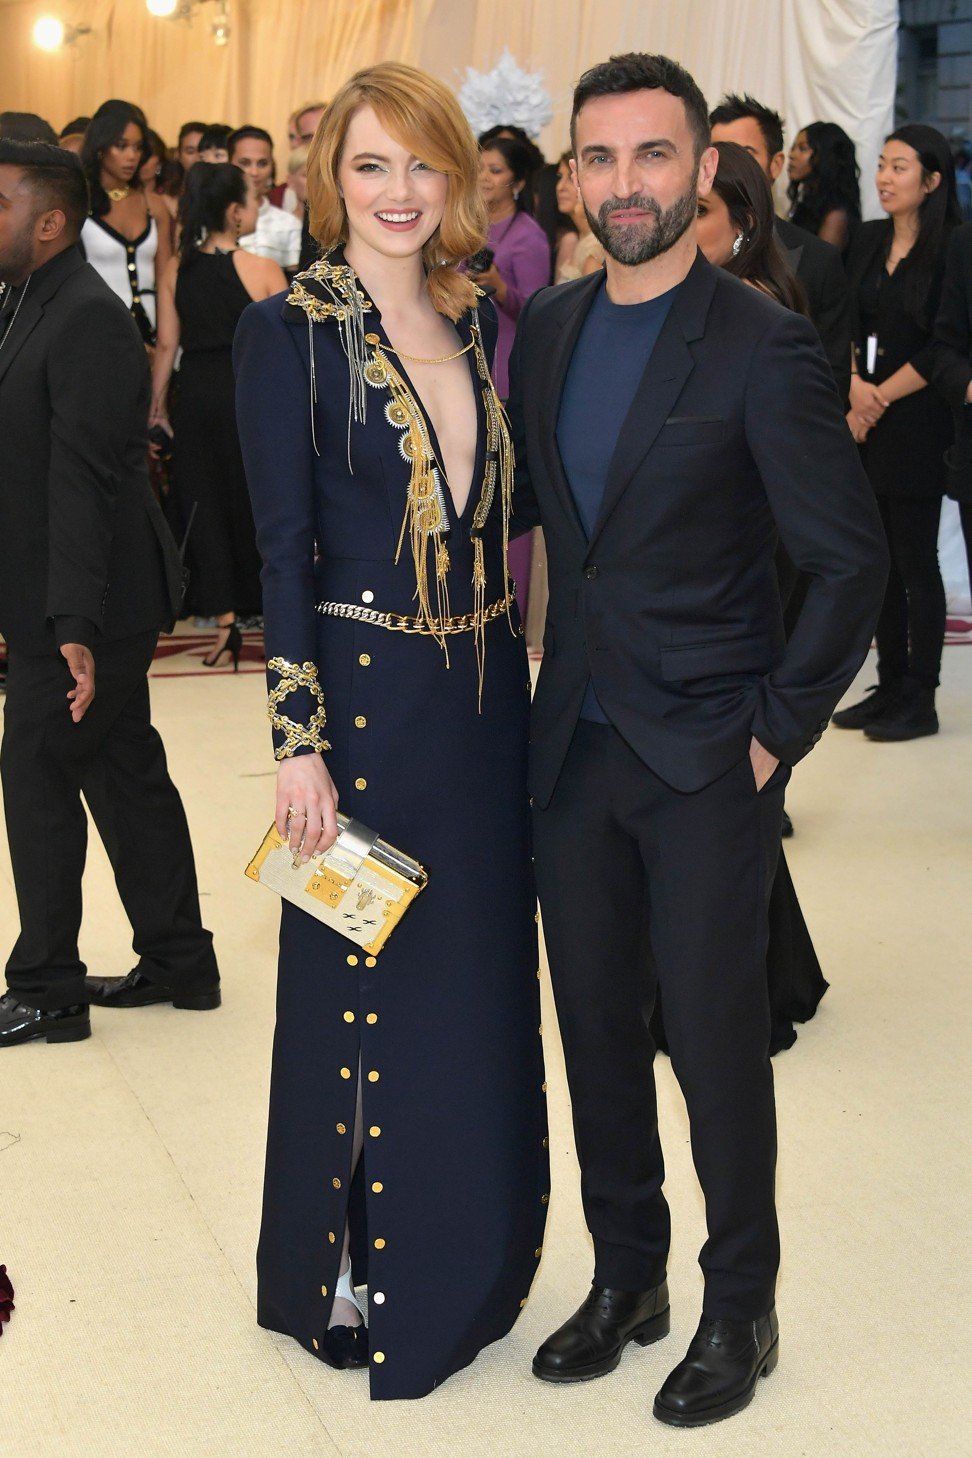 Actress Emma Stone and designer Nicolas Ghesquiere attend the Met Gala on May 7, 2018. Photo: AFP